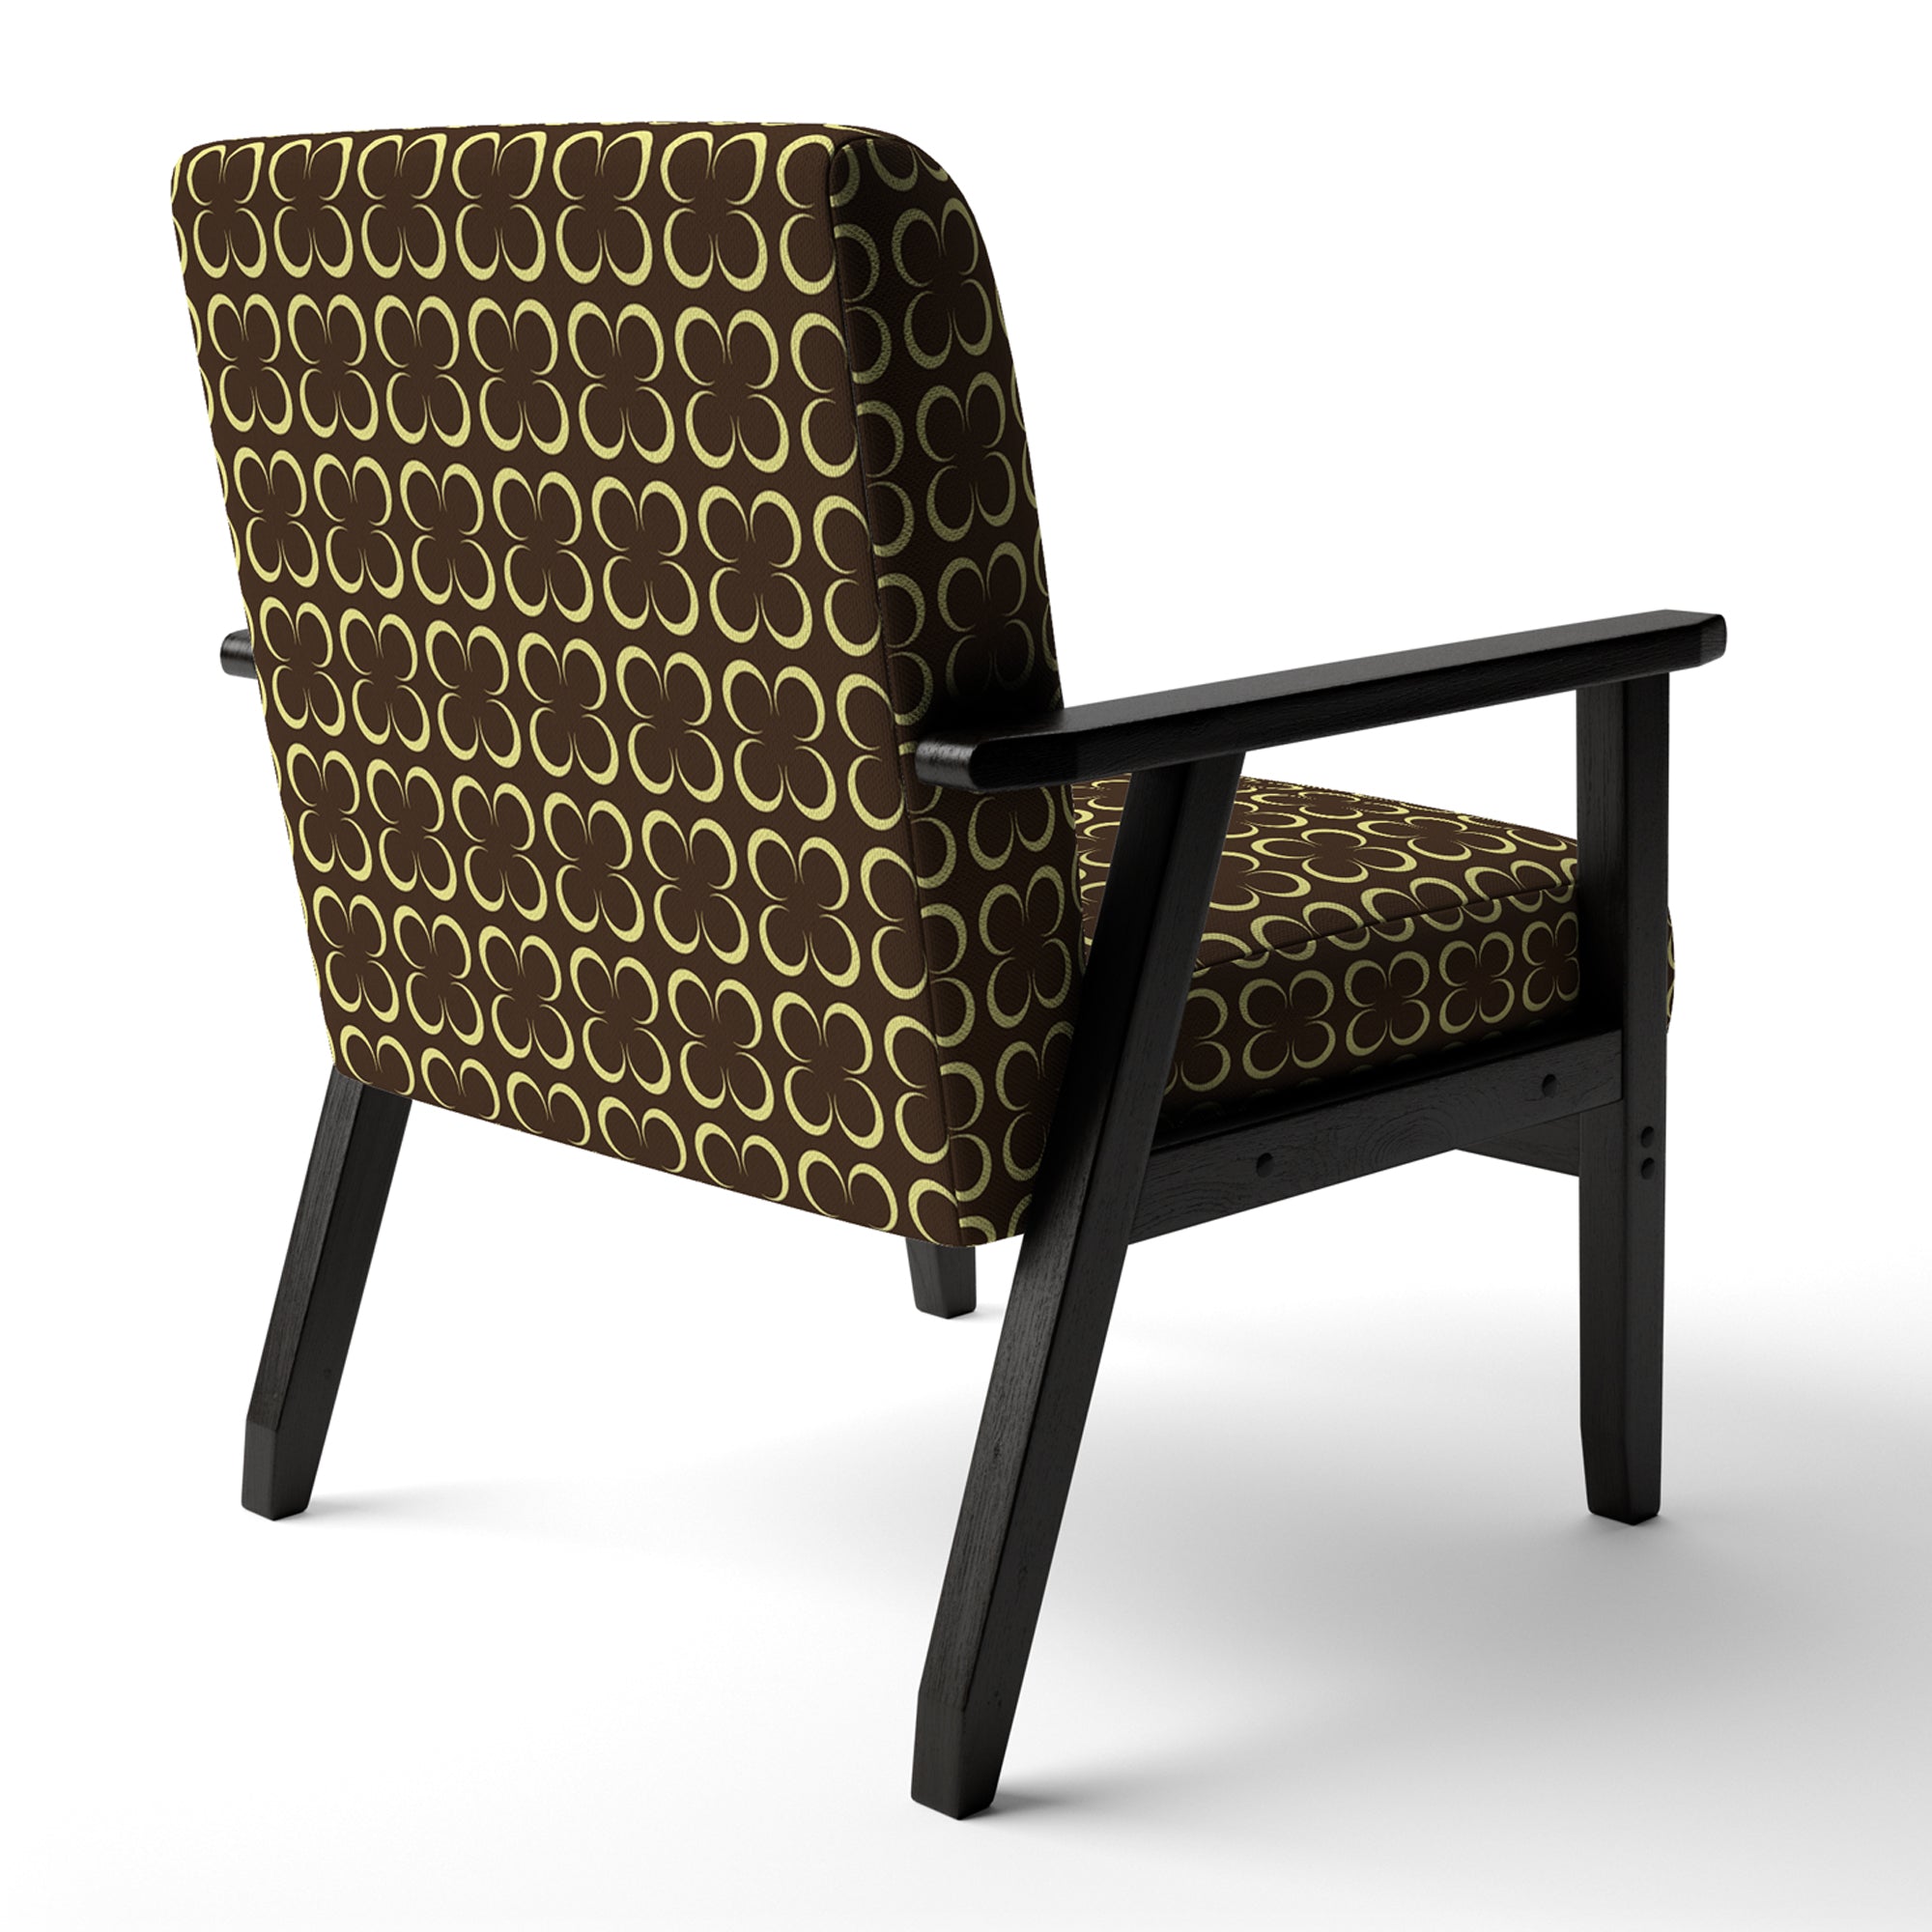 Floral Retro Pattern II Mid-Century Accent Chair